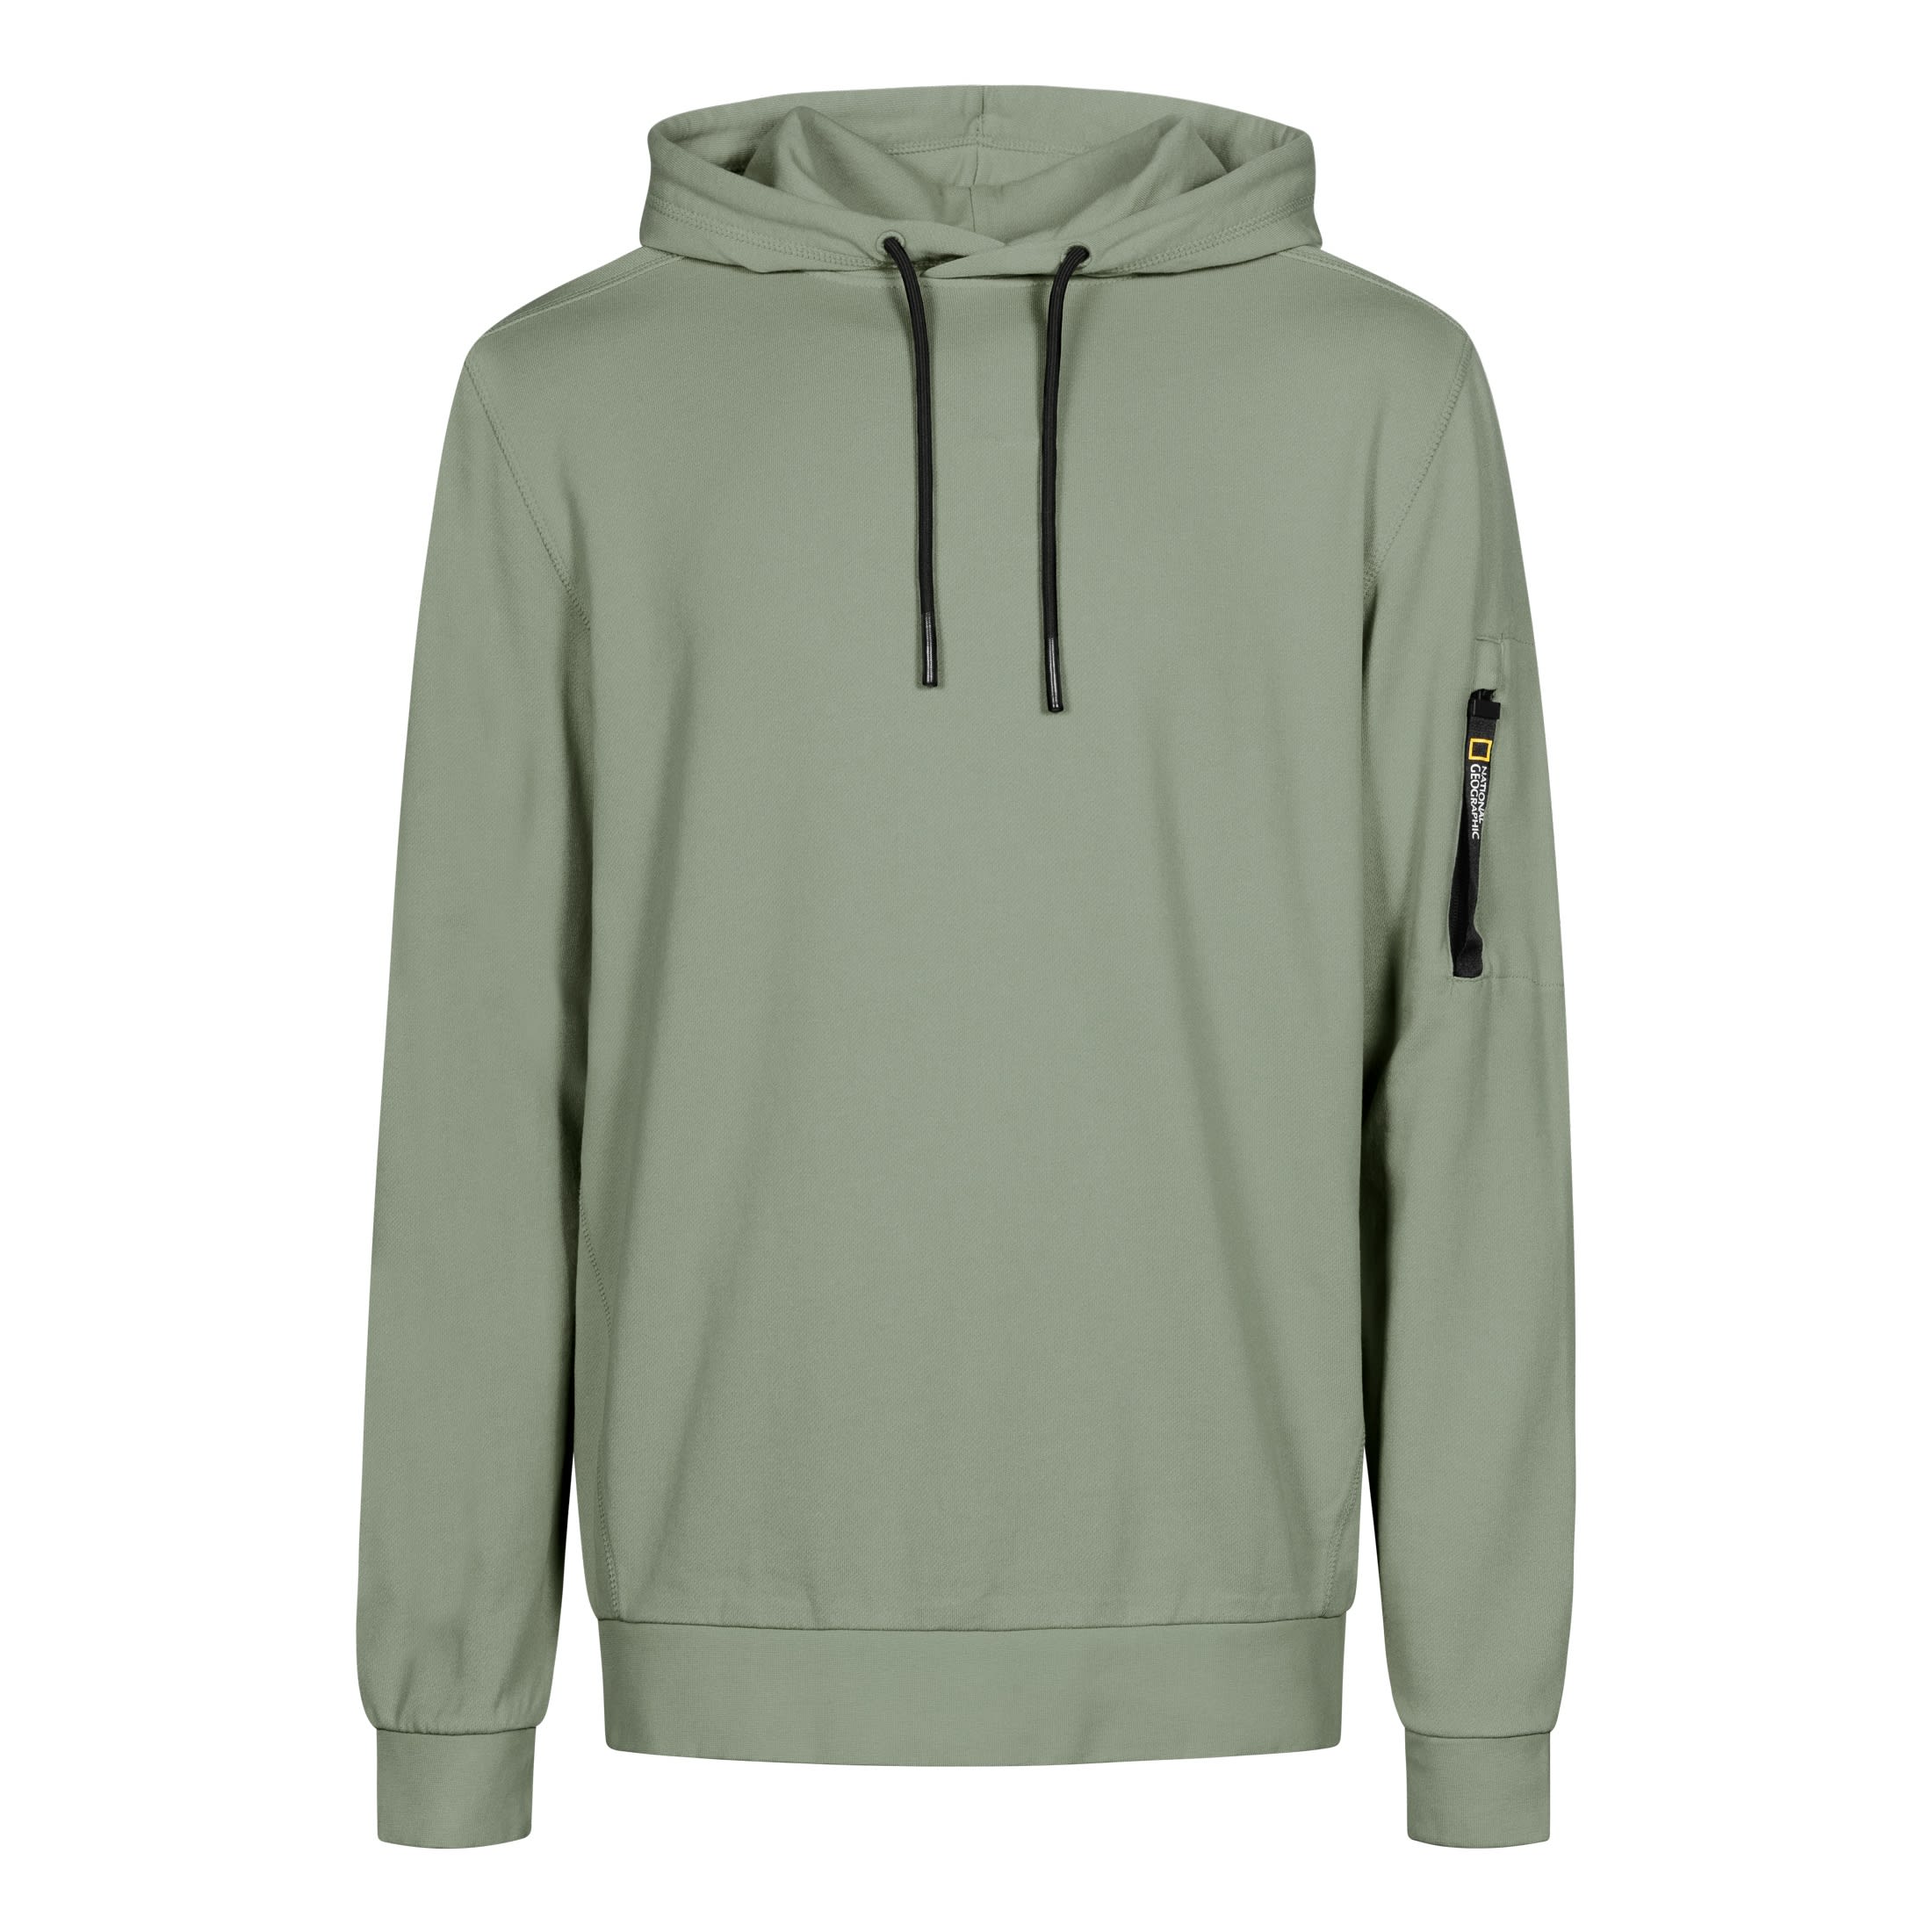 Buy National Geographic Garment Dyed Hoodie from Outnorth